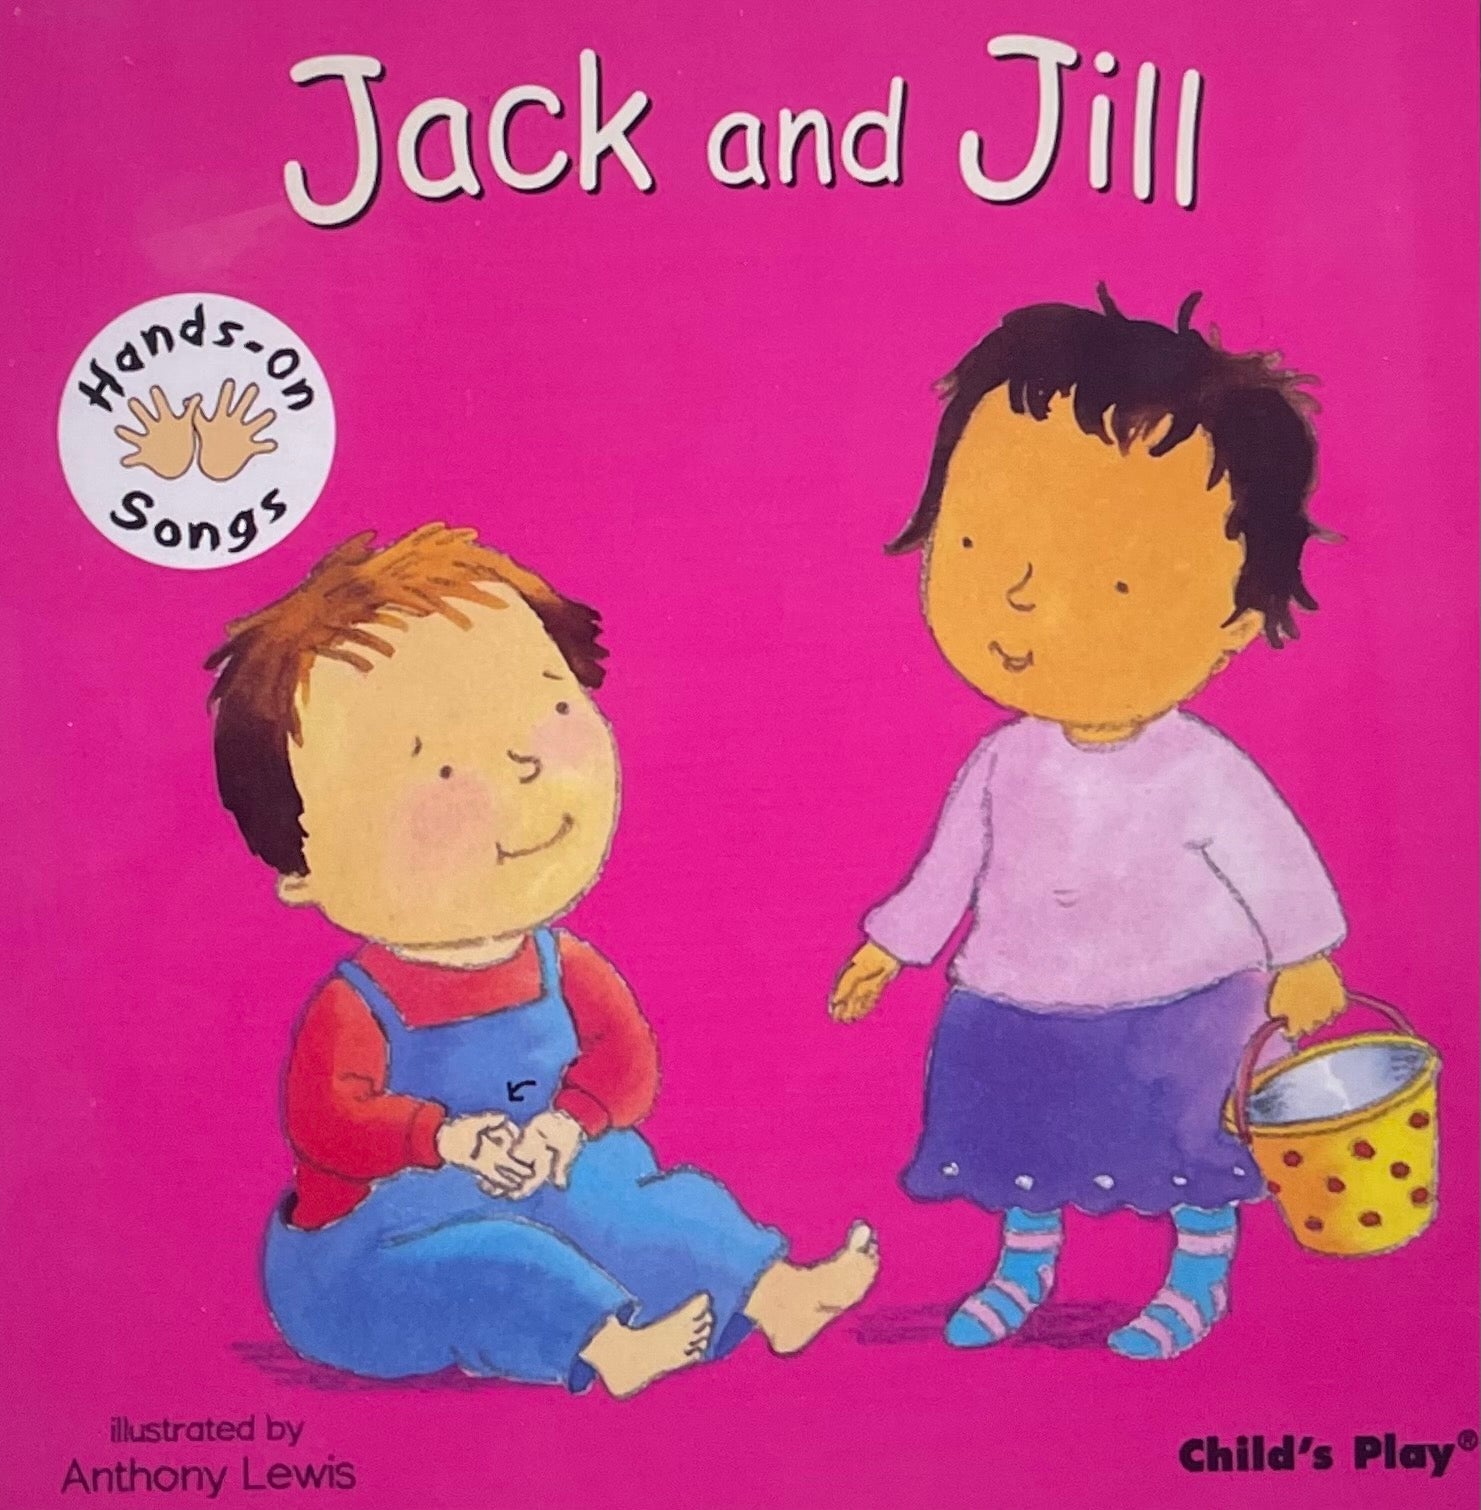 Jack and Jill (Hands on Songs)